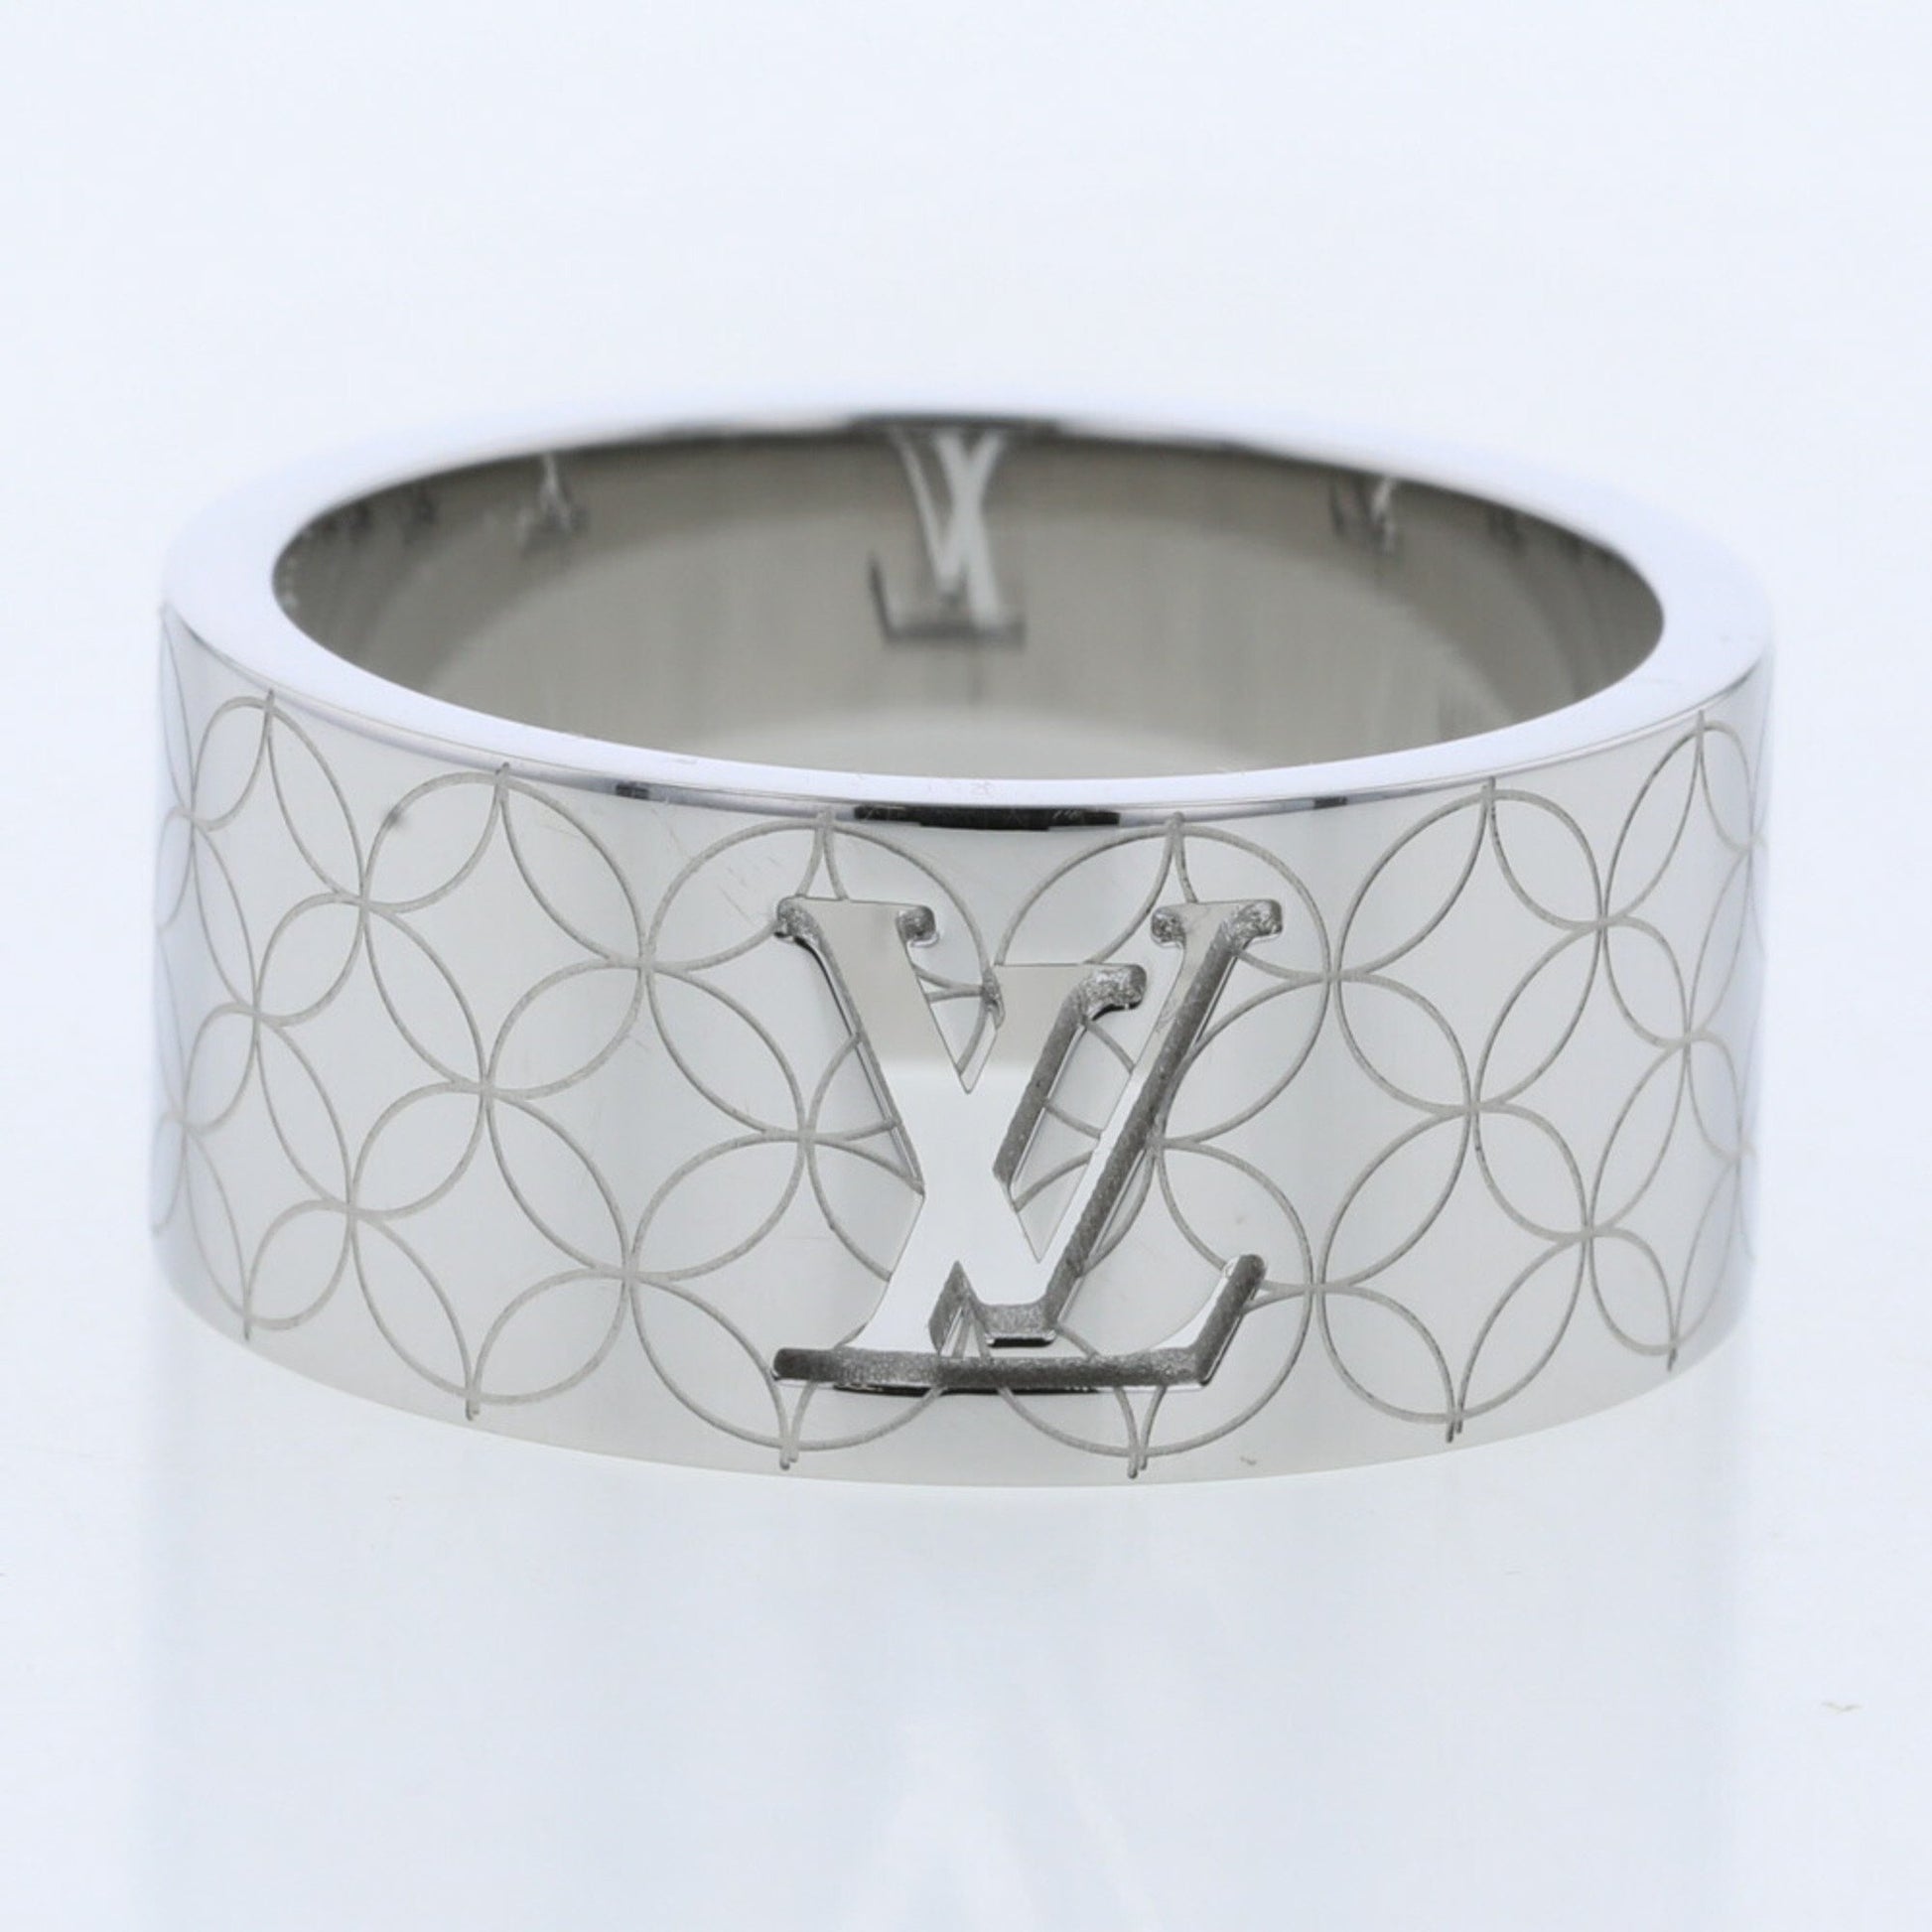 LOUIS VUITTON Ring Berg Champs Elysees M65456 Silver Plated Upper No.